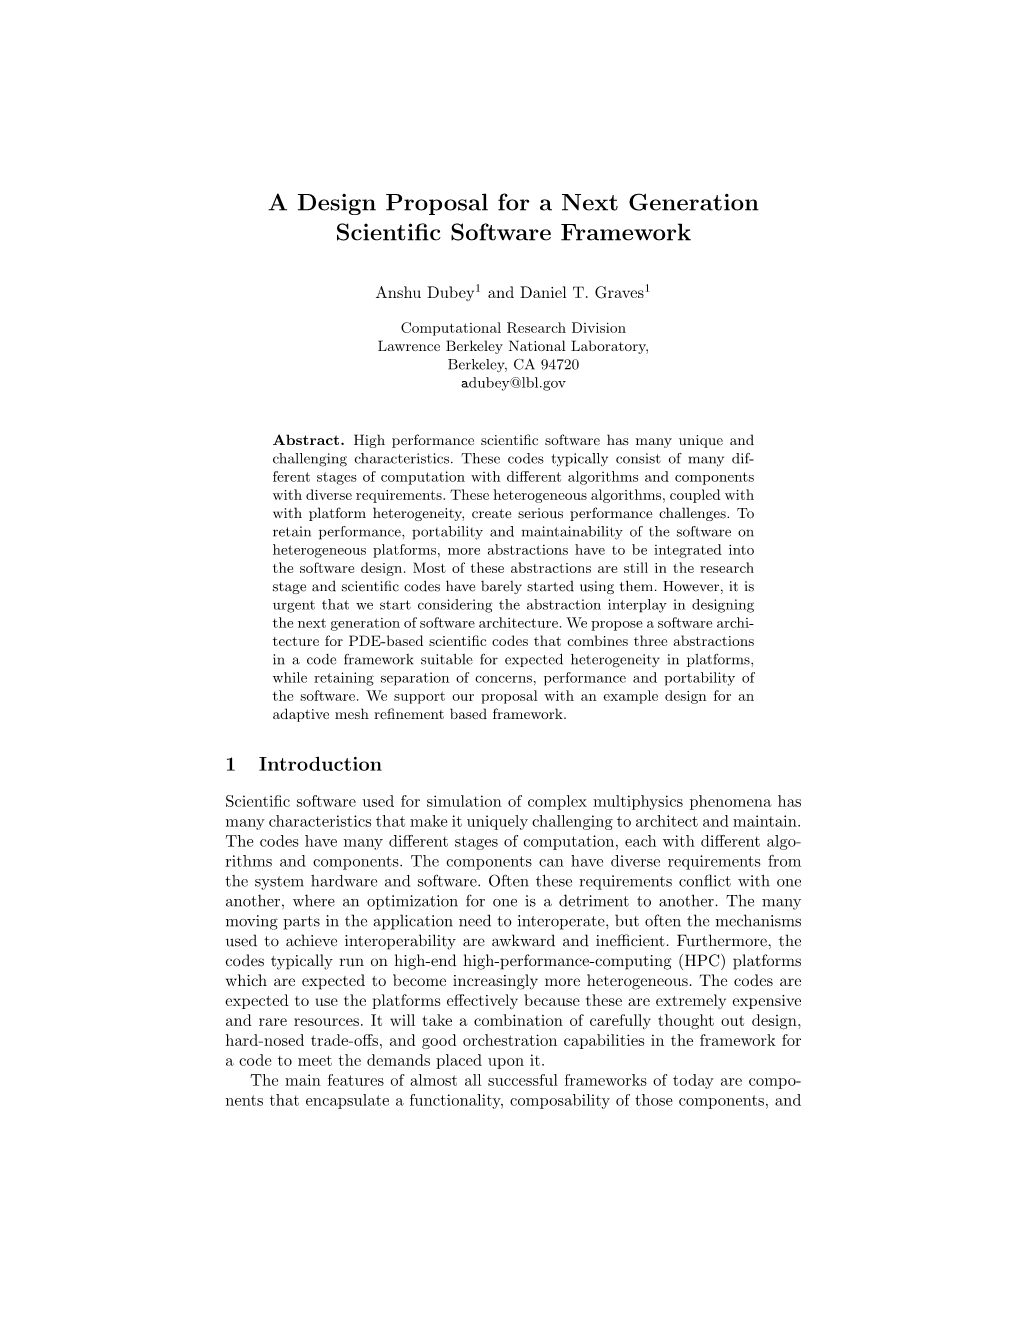 A Design Proposal for a Next Generation Scientific Software